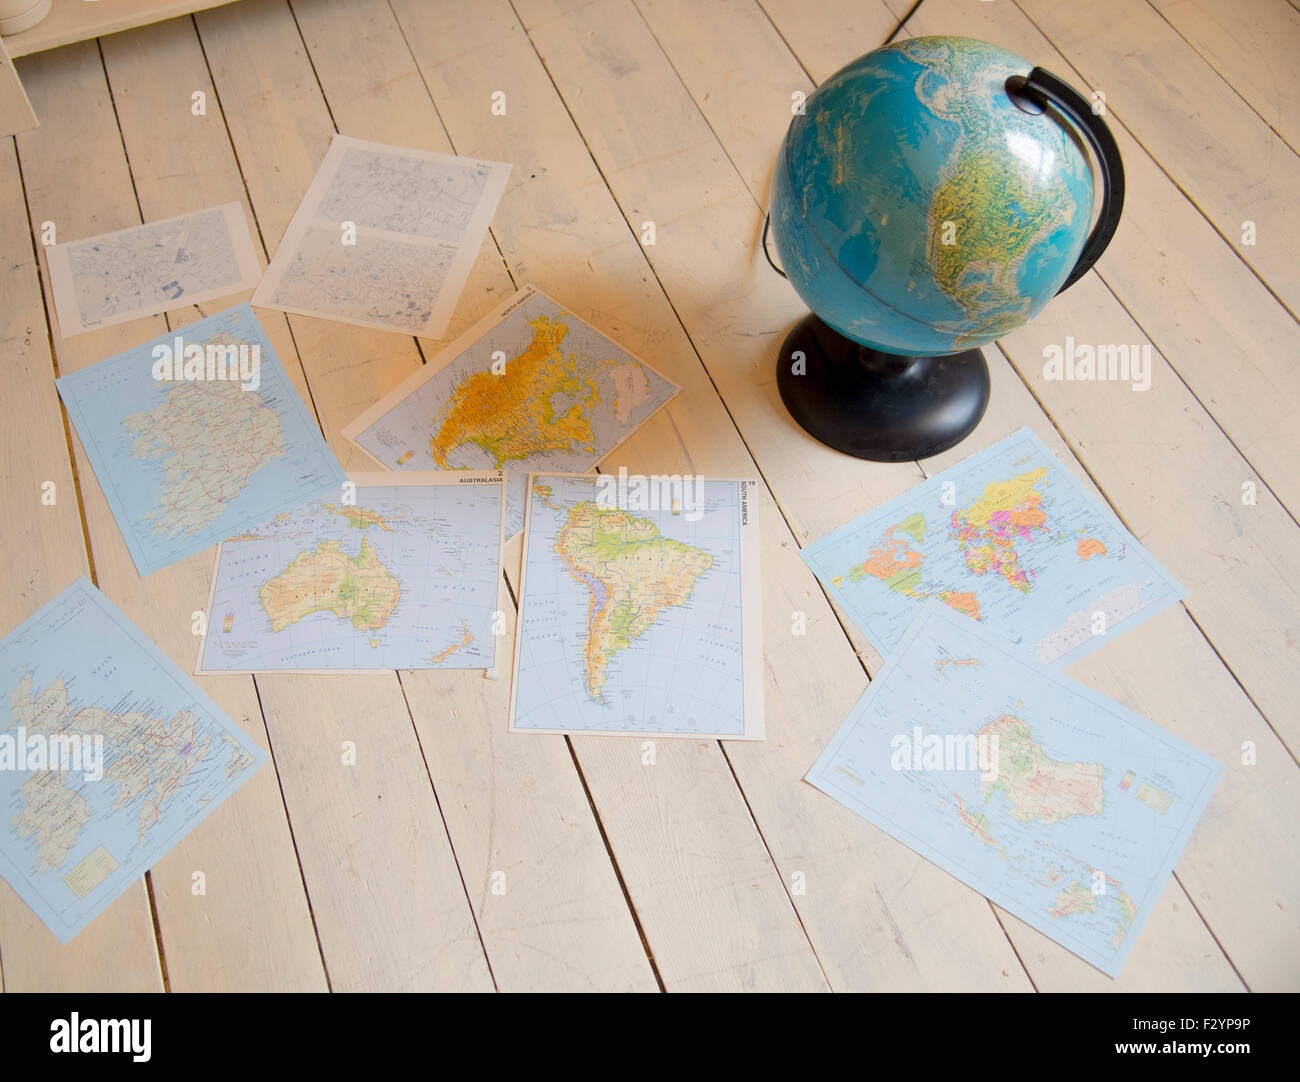 Looking to travel, maps and globe on the ground. Stock Photo